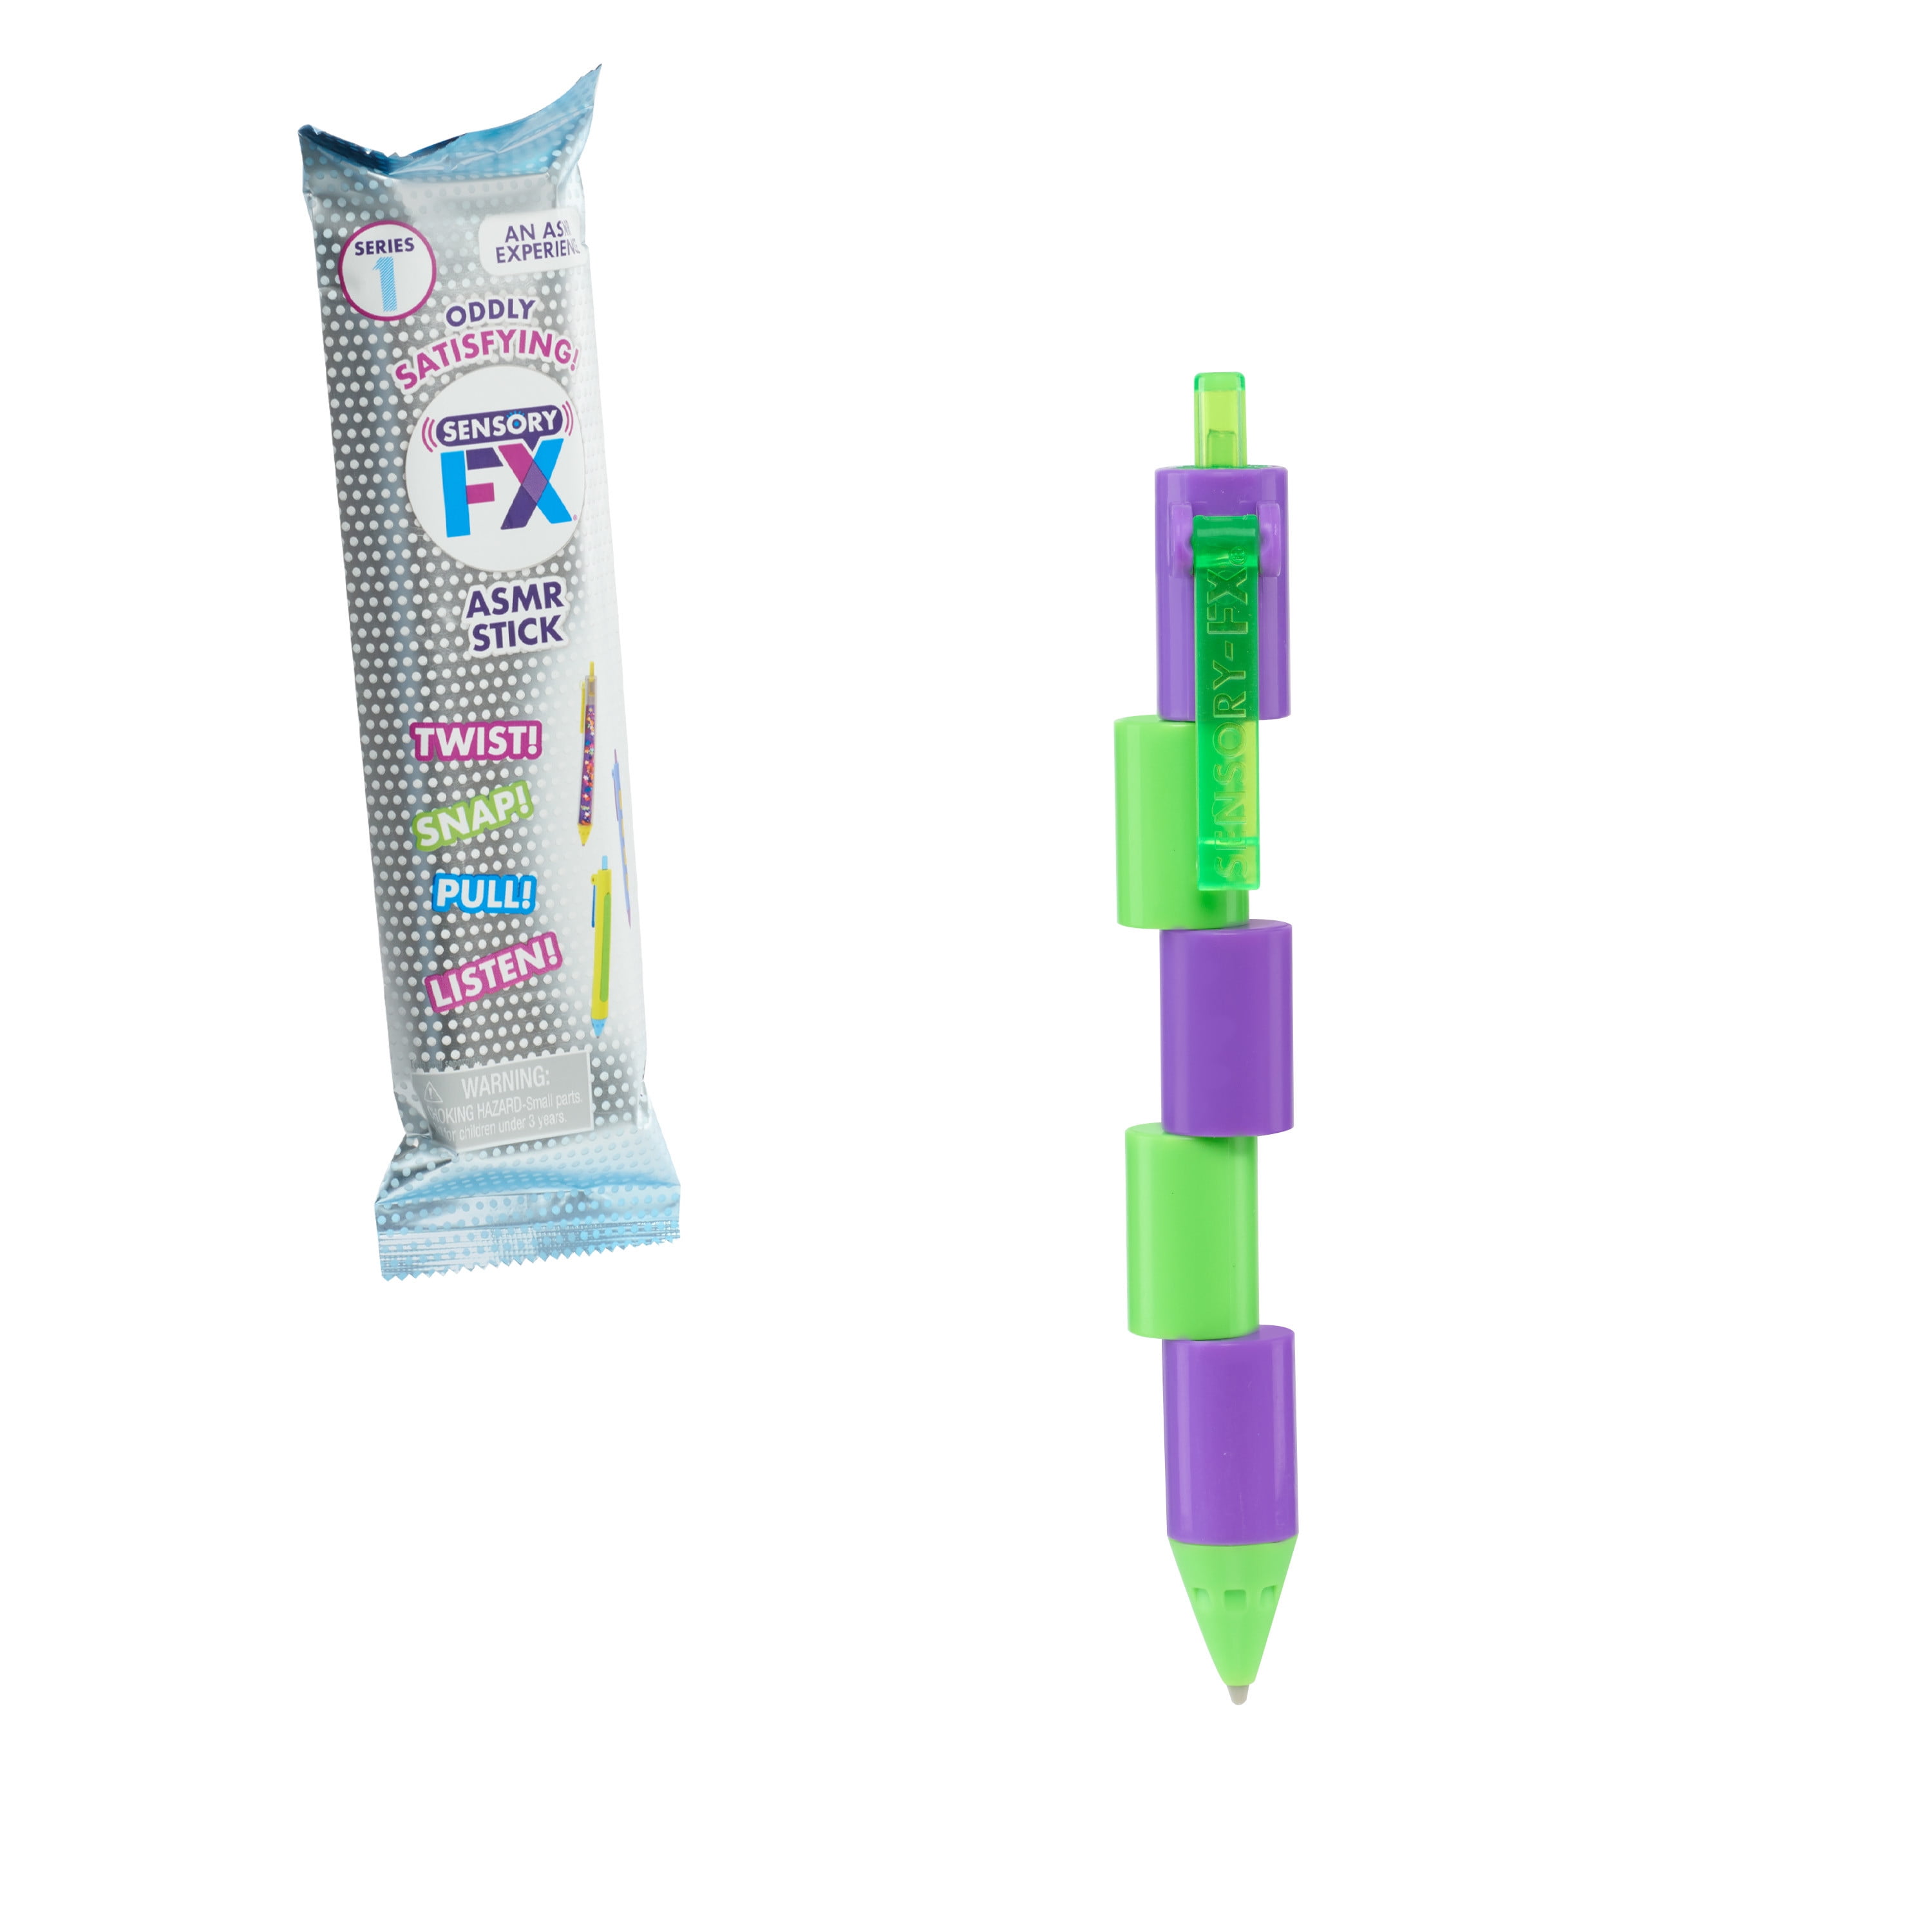 Sensory FX Sticks, Sold Separately, Styles May Vary, Kids Toys for 4 Gifts Presents - Walmart.com